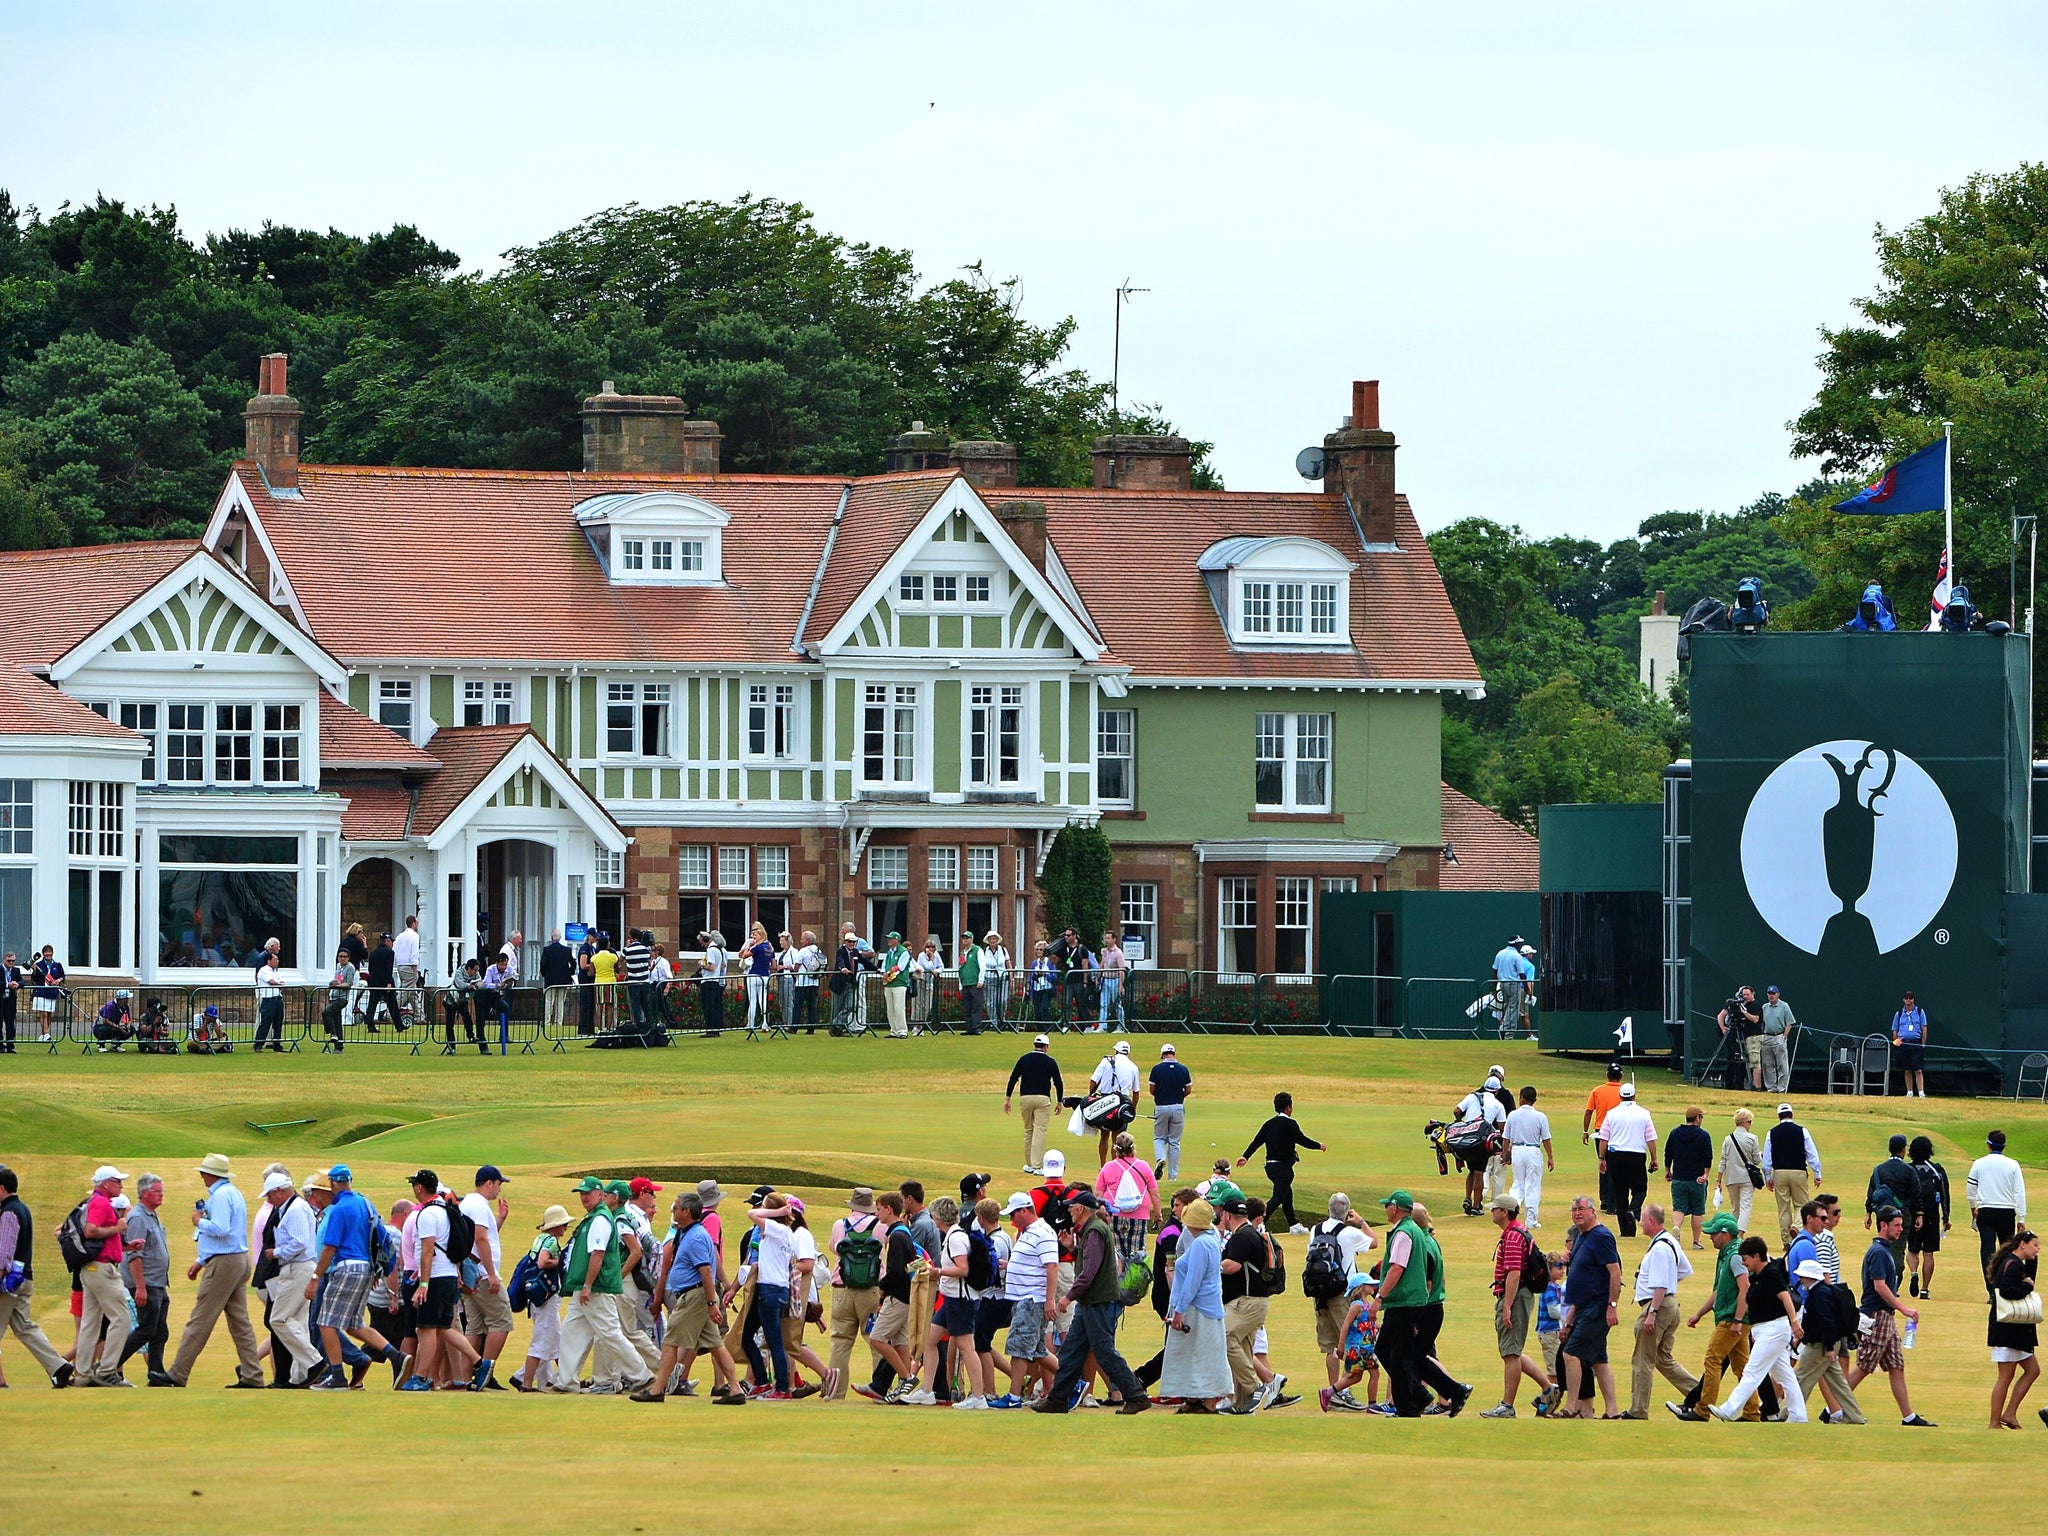 Golf fans make their way across the 18th fairway during practice for the Open Championship at Muirfield